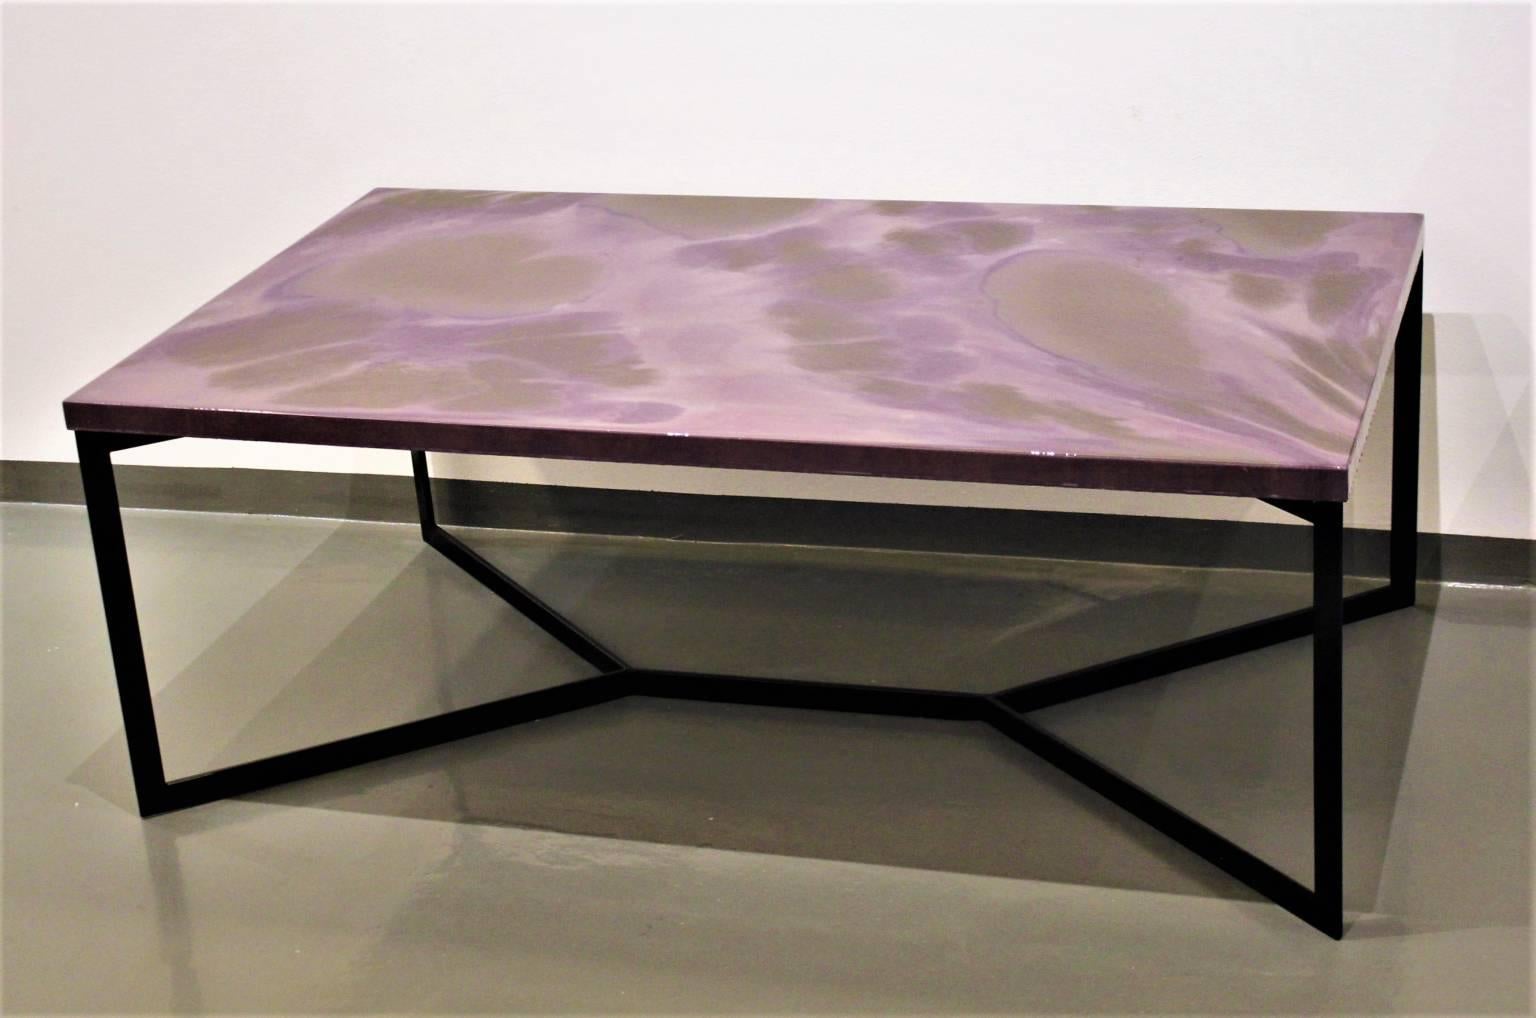 This one of a kind coffee table is part of Viscosity Art & Resin Gallery art furniture collection.
Handcrafted to perfection, with a delicate pattern made of layers of resin on its tabletop, this creations consists a synonym of elegance.
Gentle